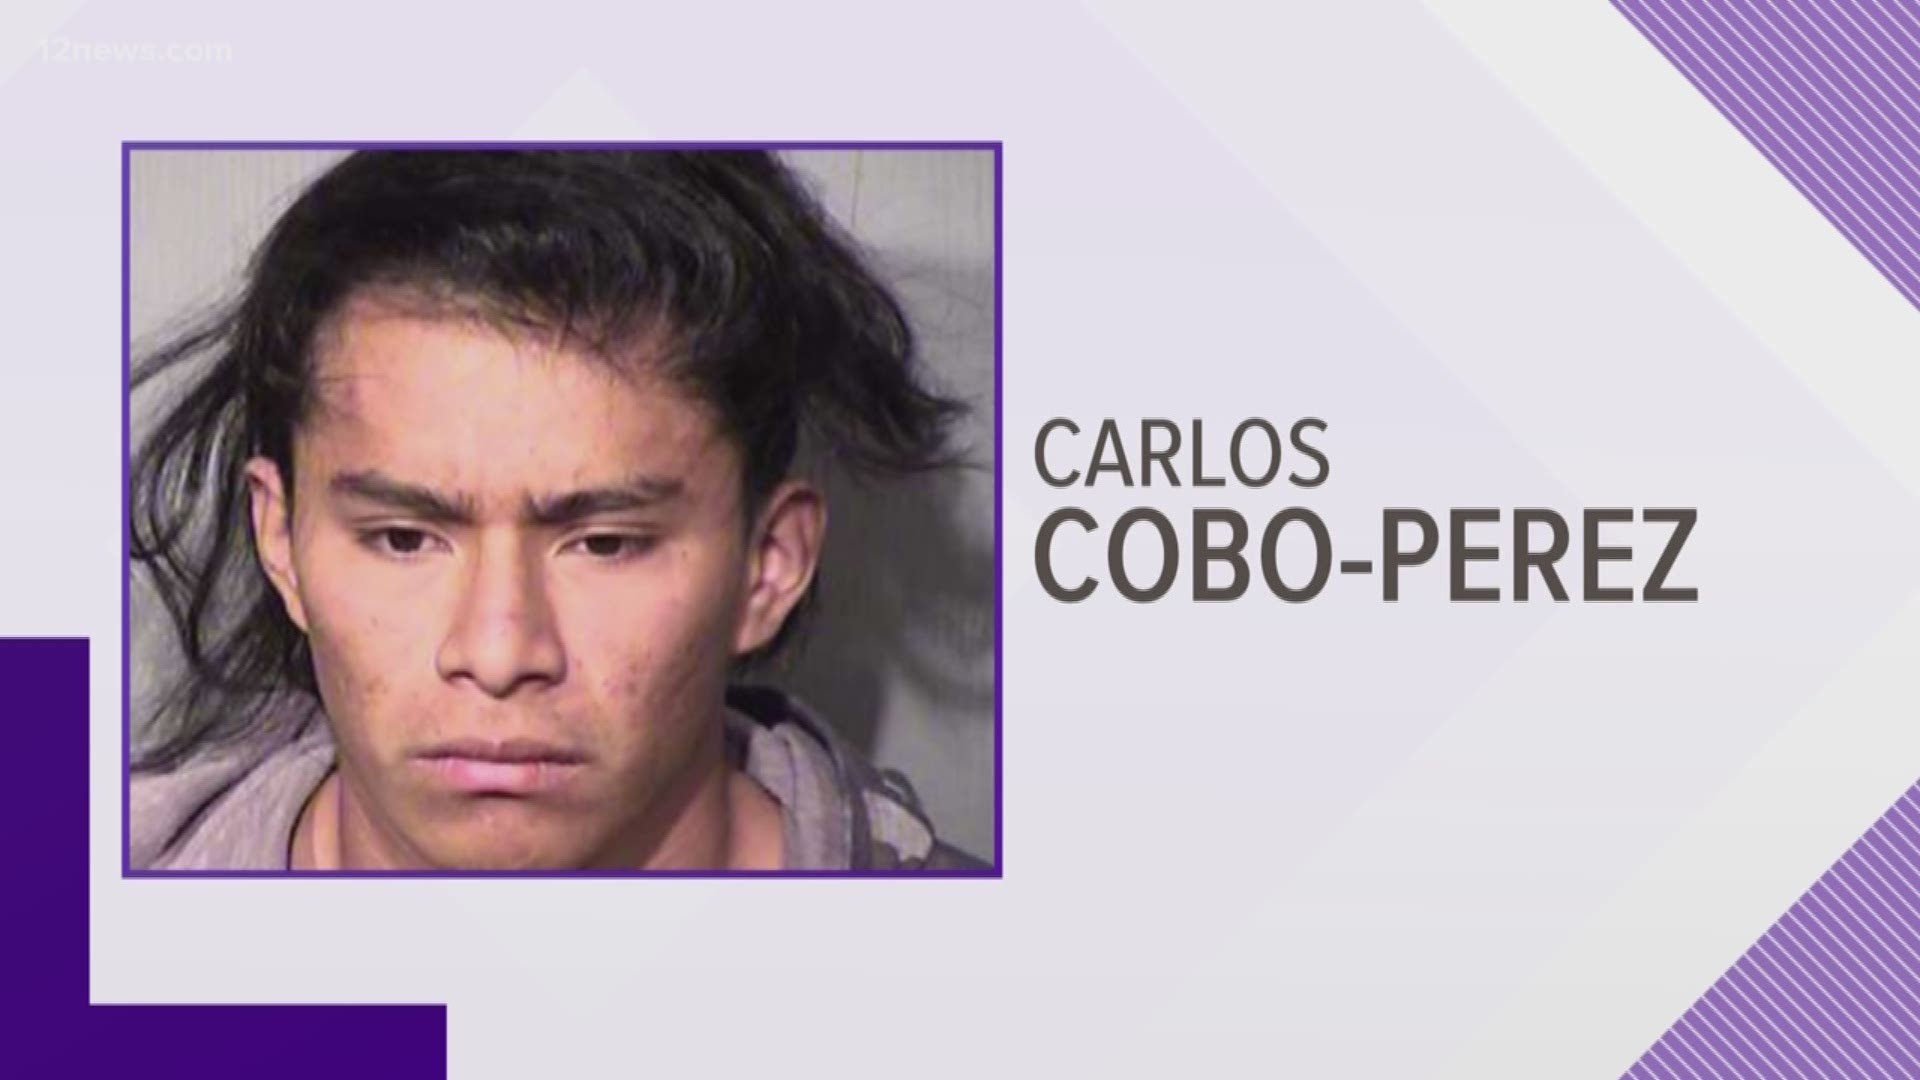 20-year-old Carlos Cobo-Perez was charged with aggravated assault and sexual conduct with a minor when an 11-year-old girl took a pregnancy test that came back positive. His relationship with the girl was discovered in late 2018 when the girl had a hickey on her neck.